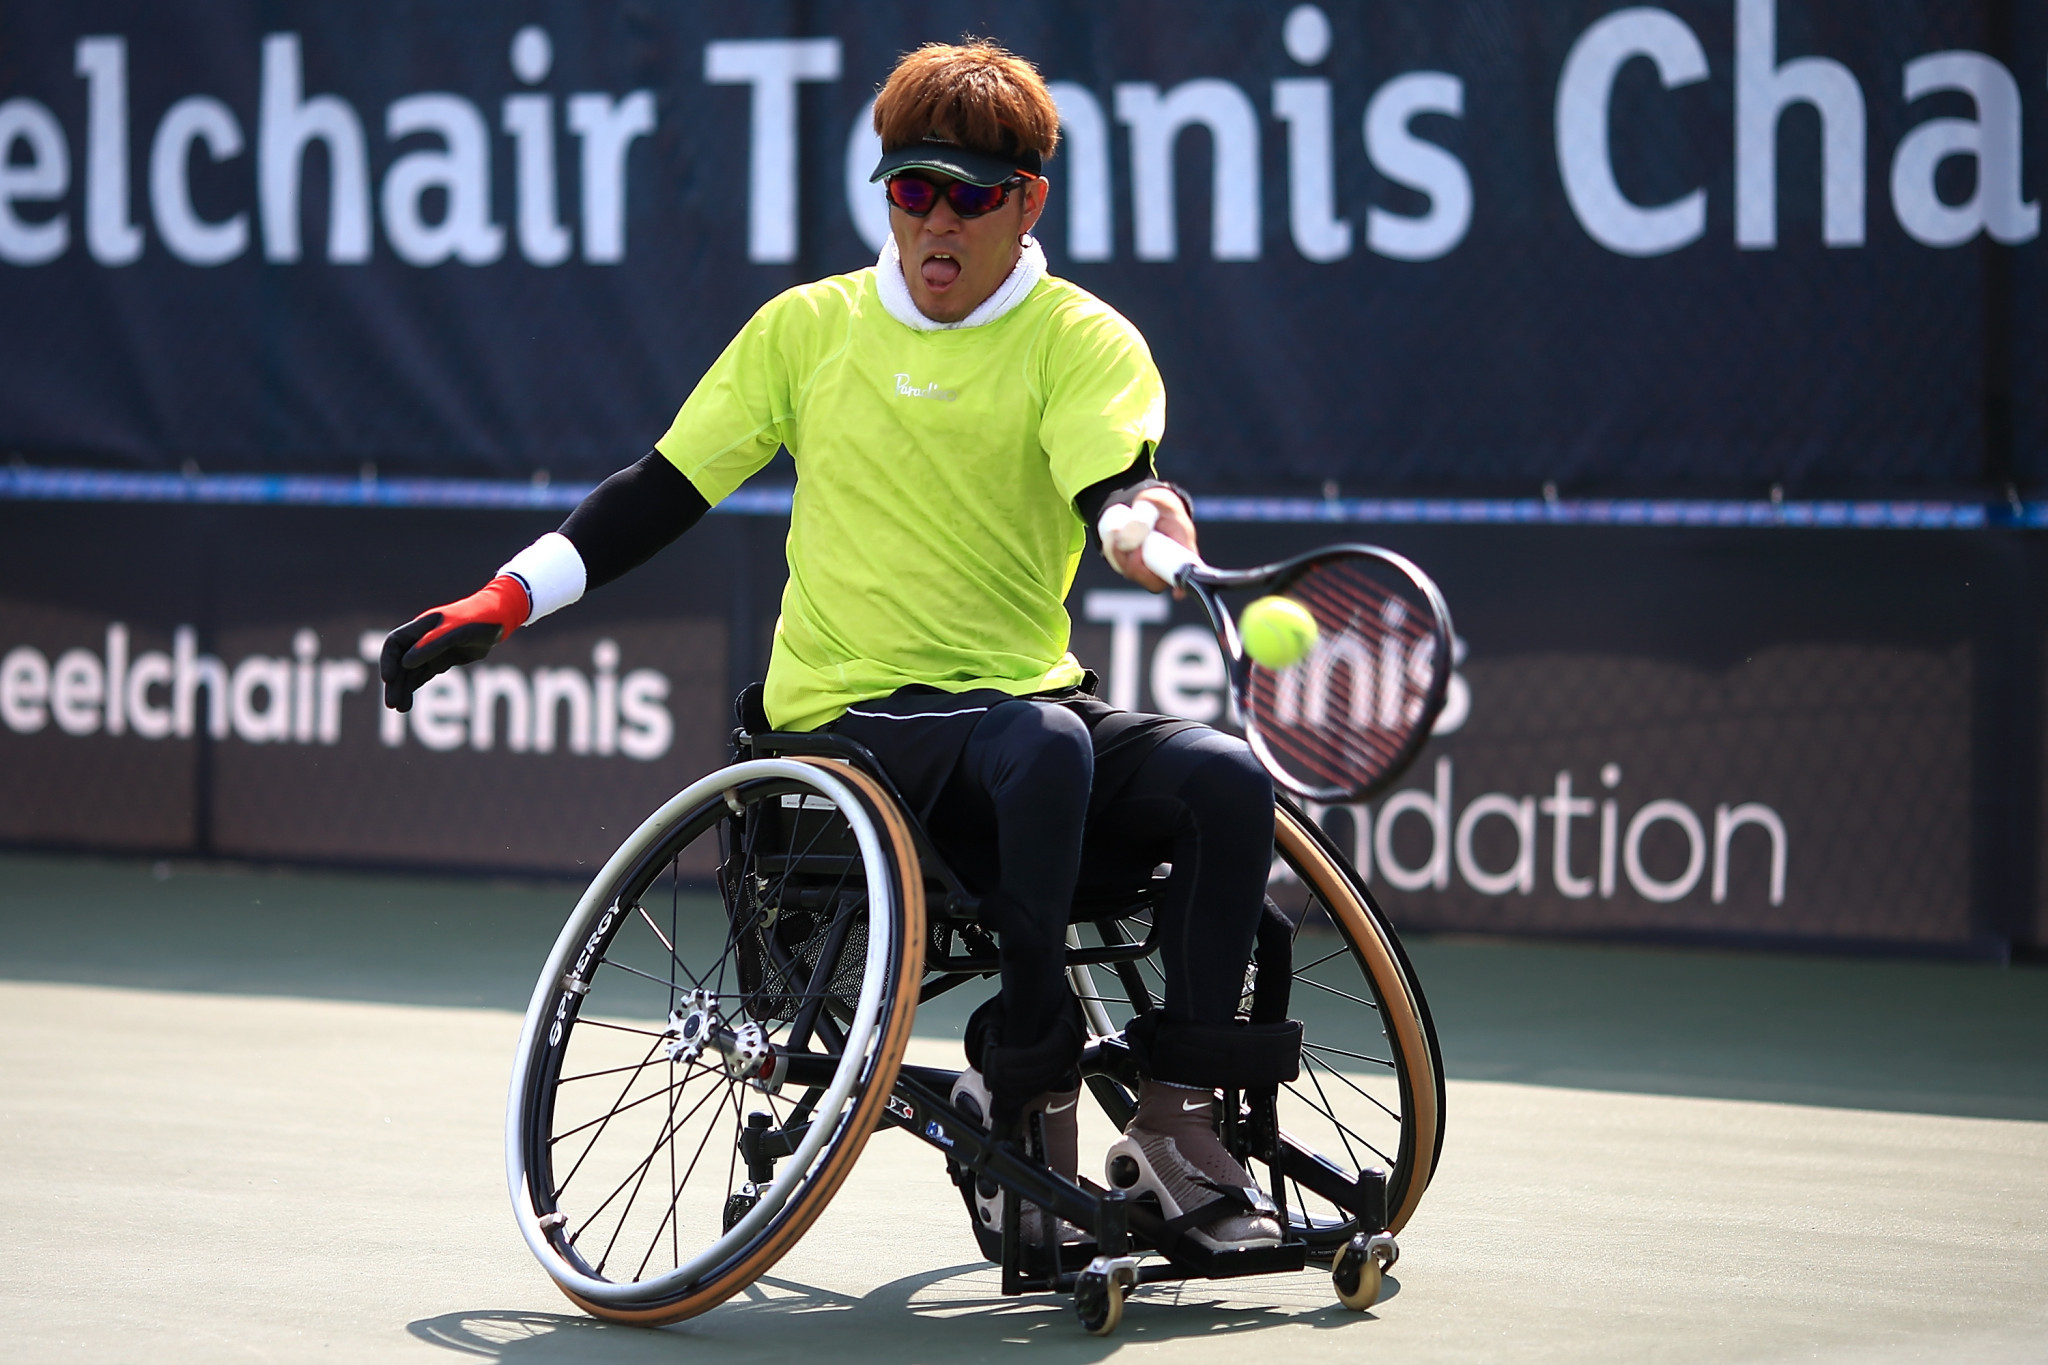 Second seed Koji Sugeno of Japan is through to the semi-finals of the quads singles event ©Getty Images